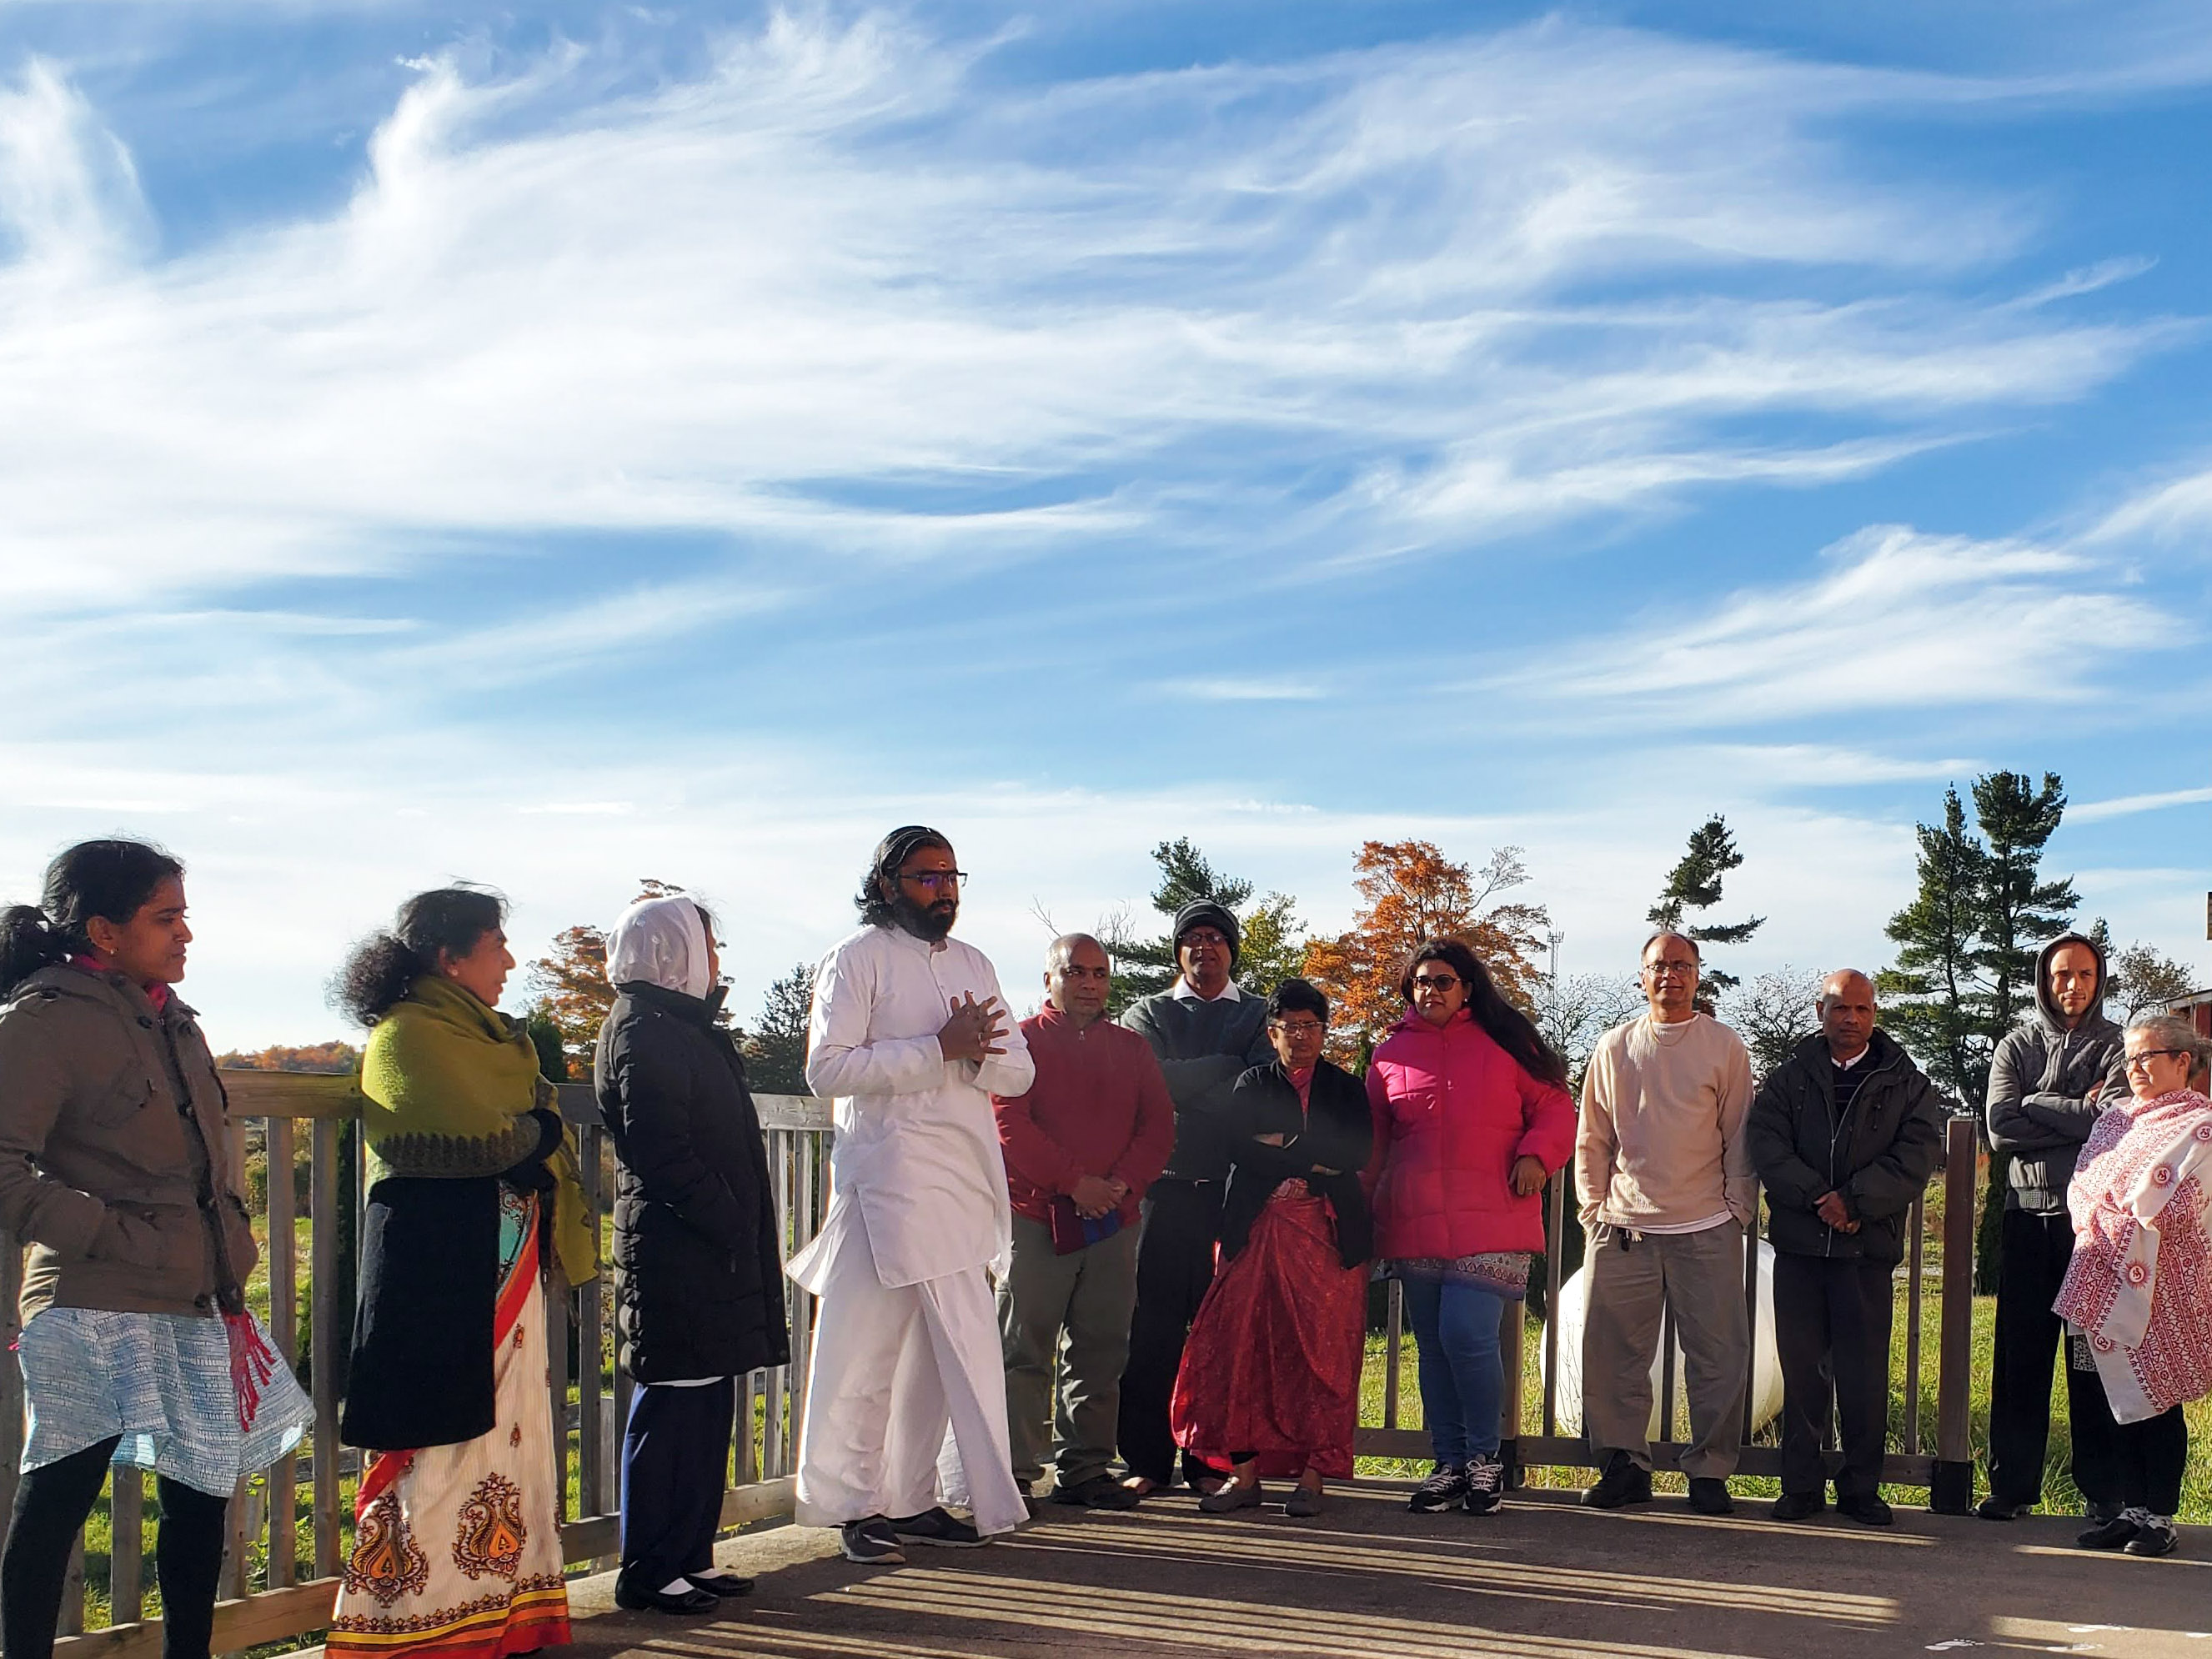 Br. Ramanand speaking to a group outside